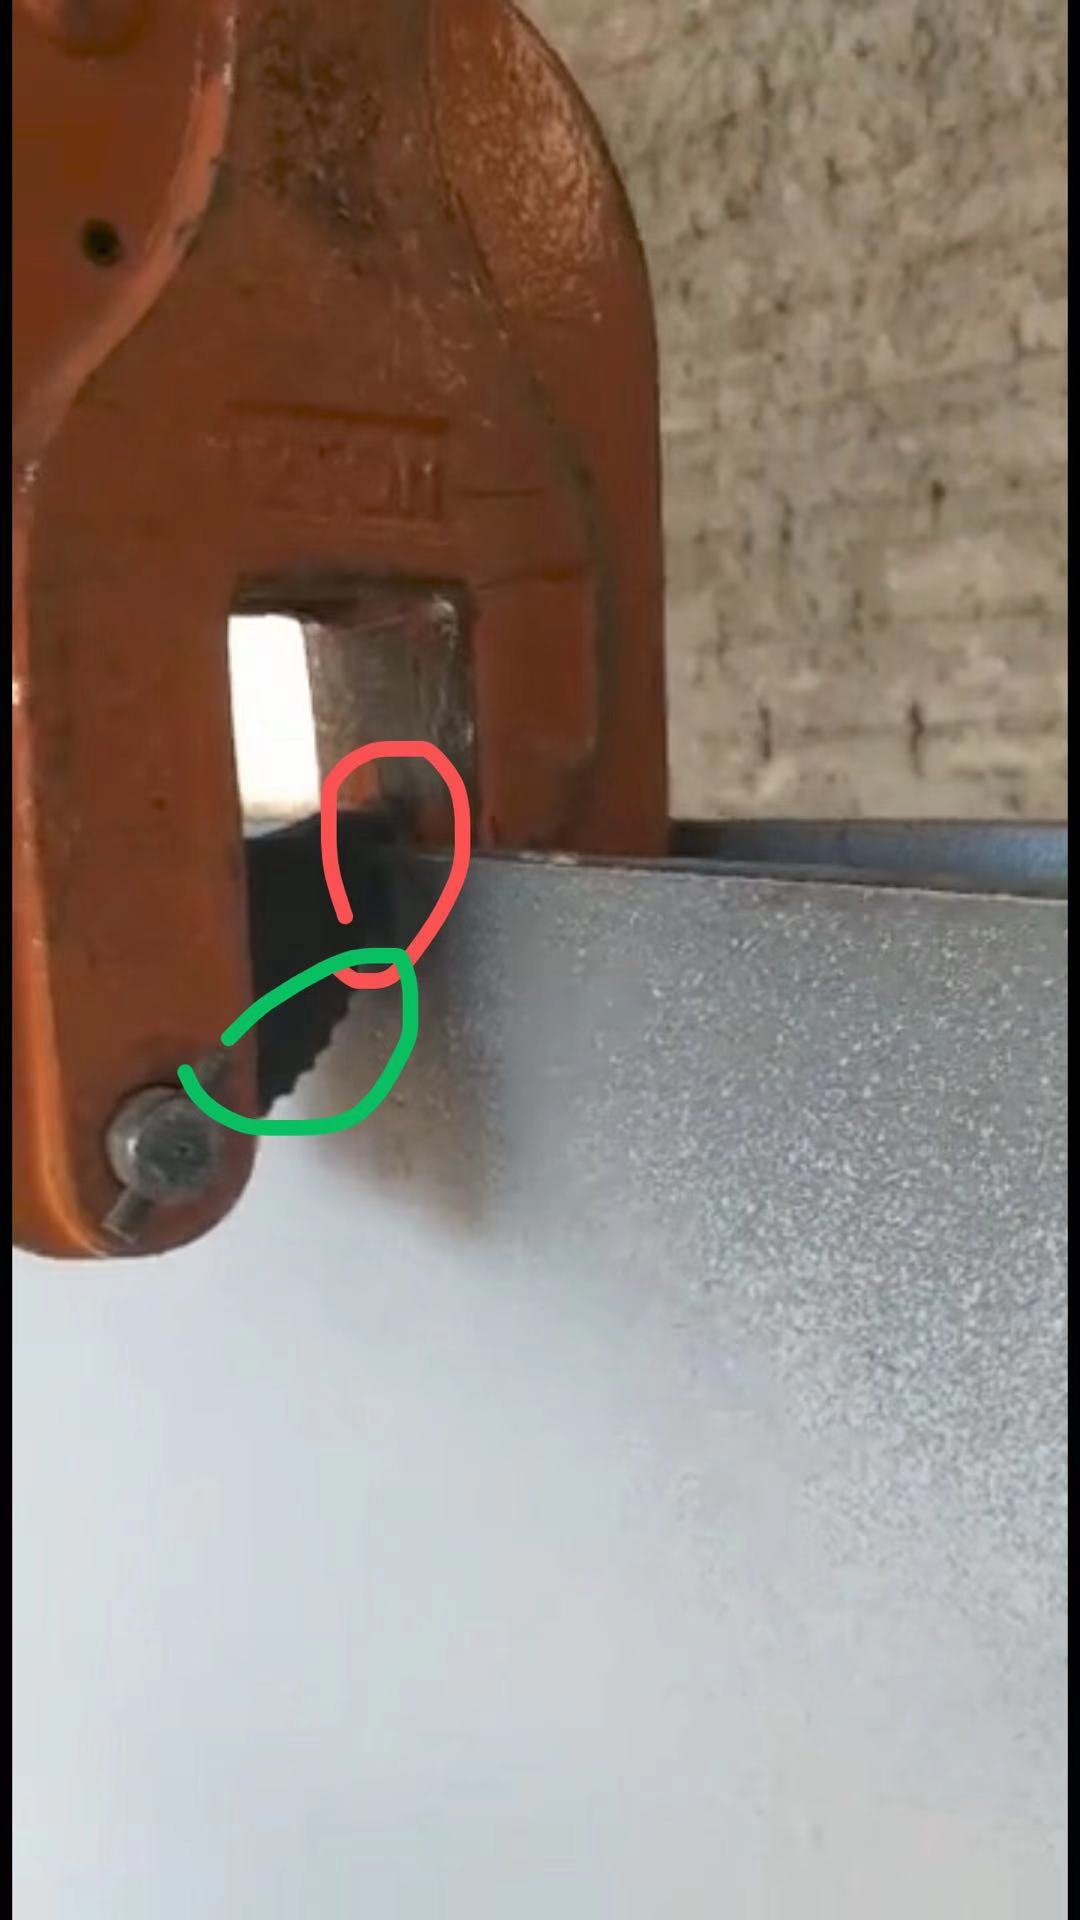 Look at my red circle. Only the tip of the tooth can clamp the plate. The rest of the teeth under the green circle can’t clamp. The problem is here.jpg